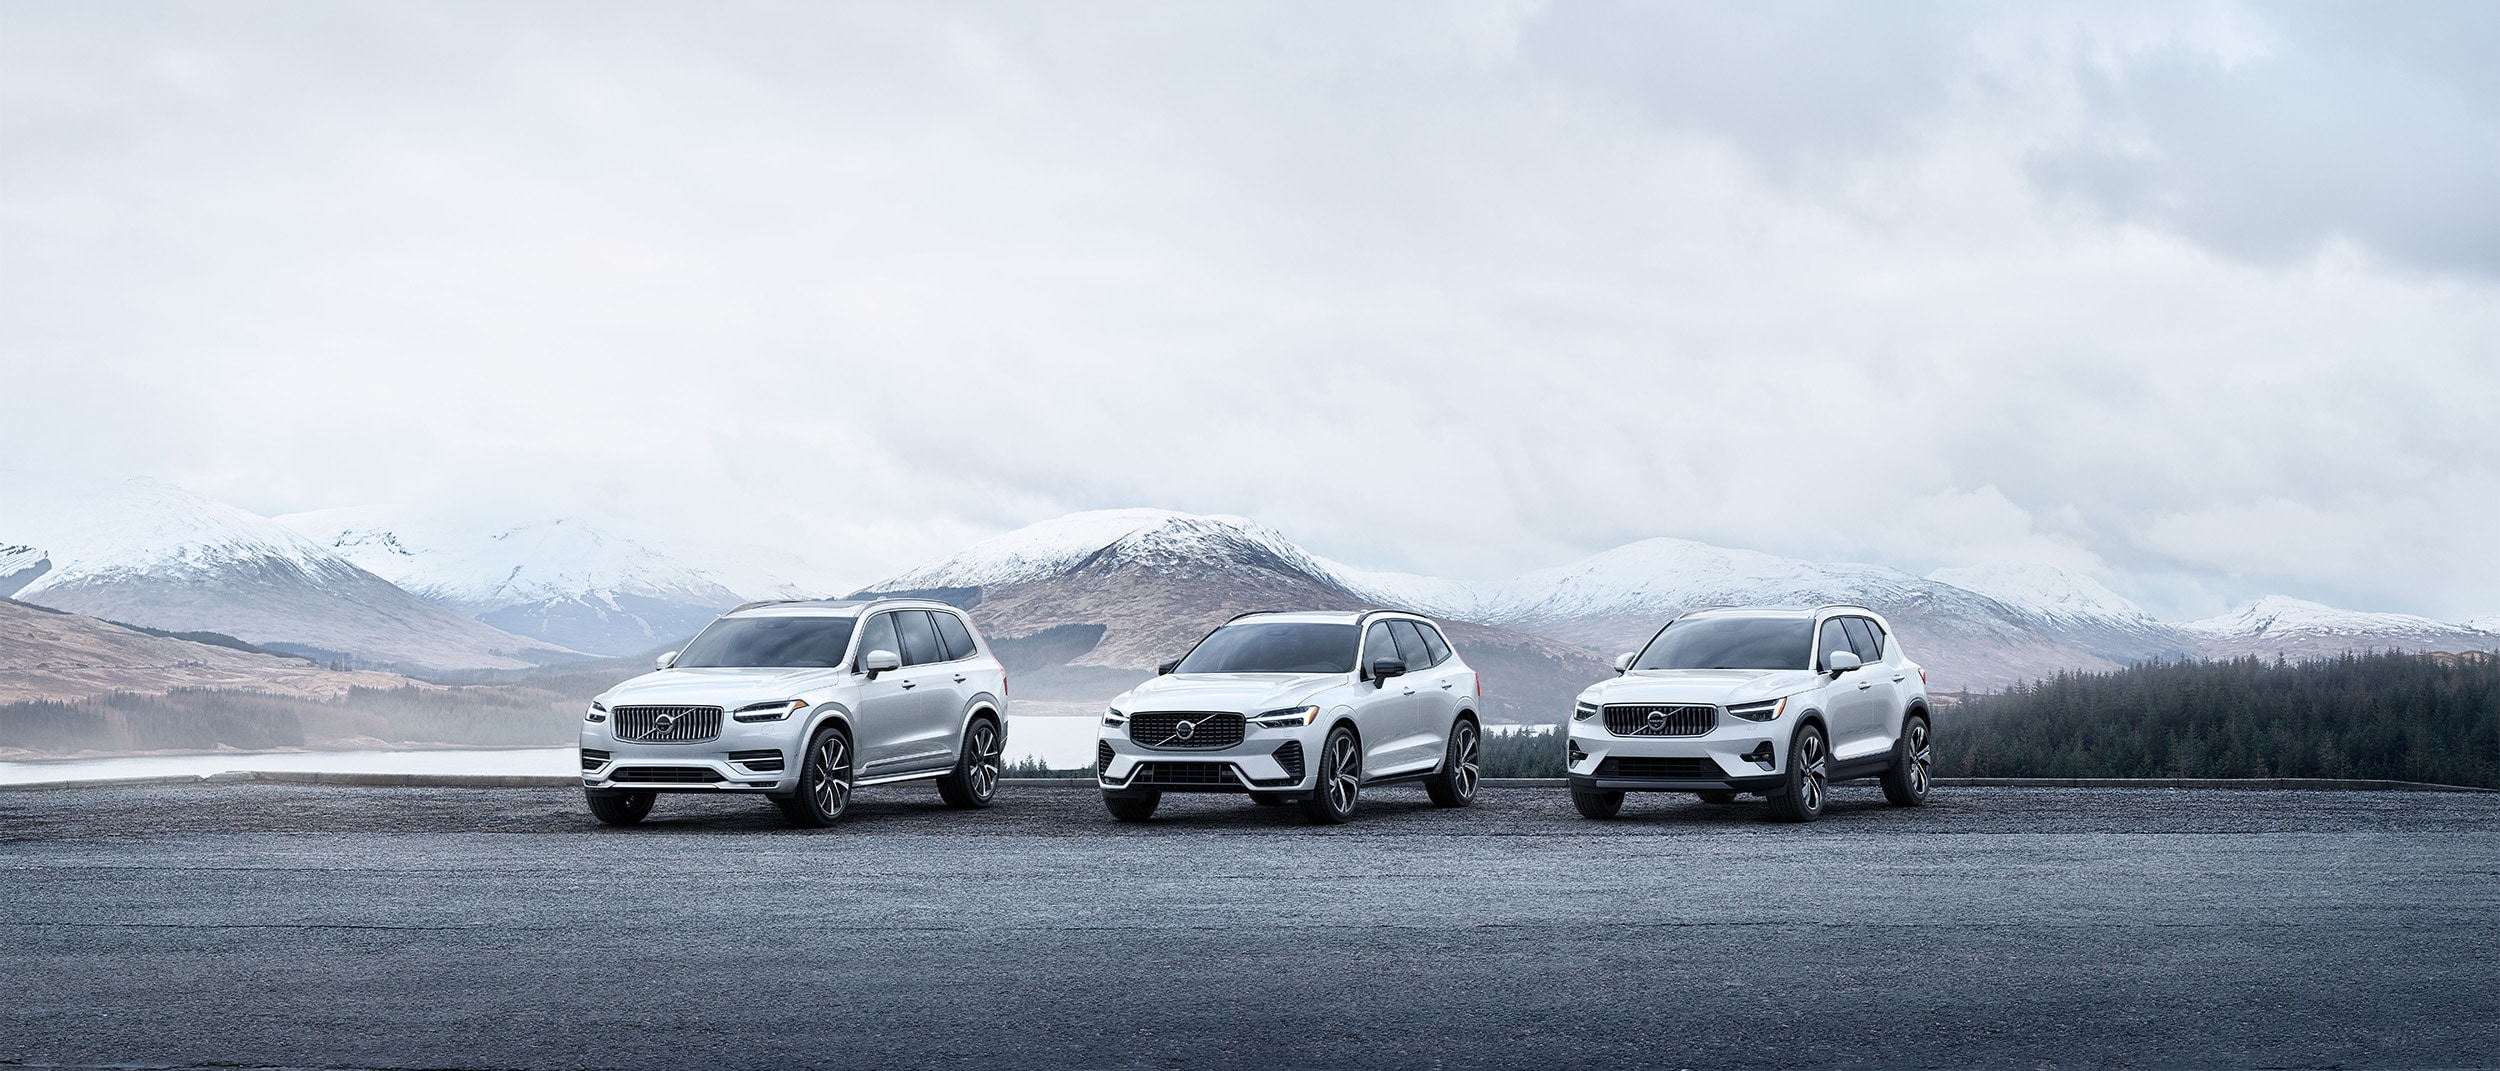 Volvo SUV Range parked in front of snowy mountain range